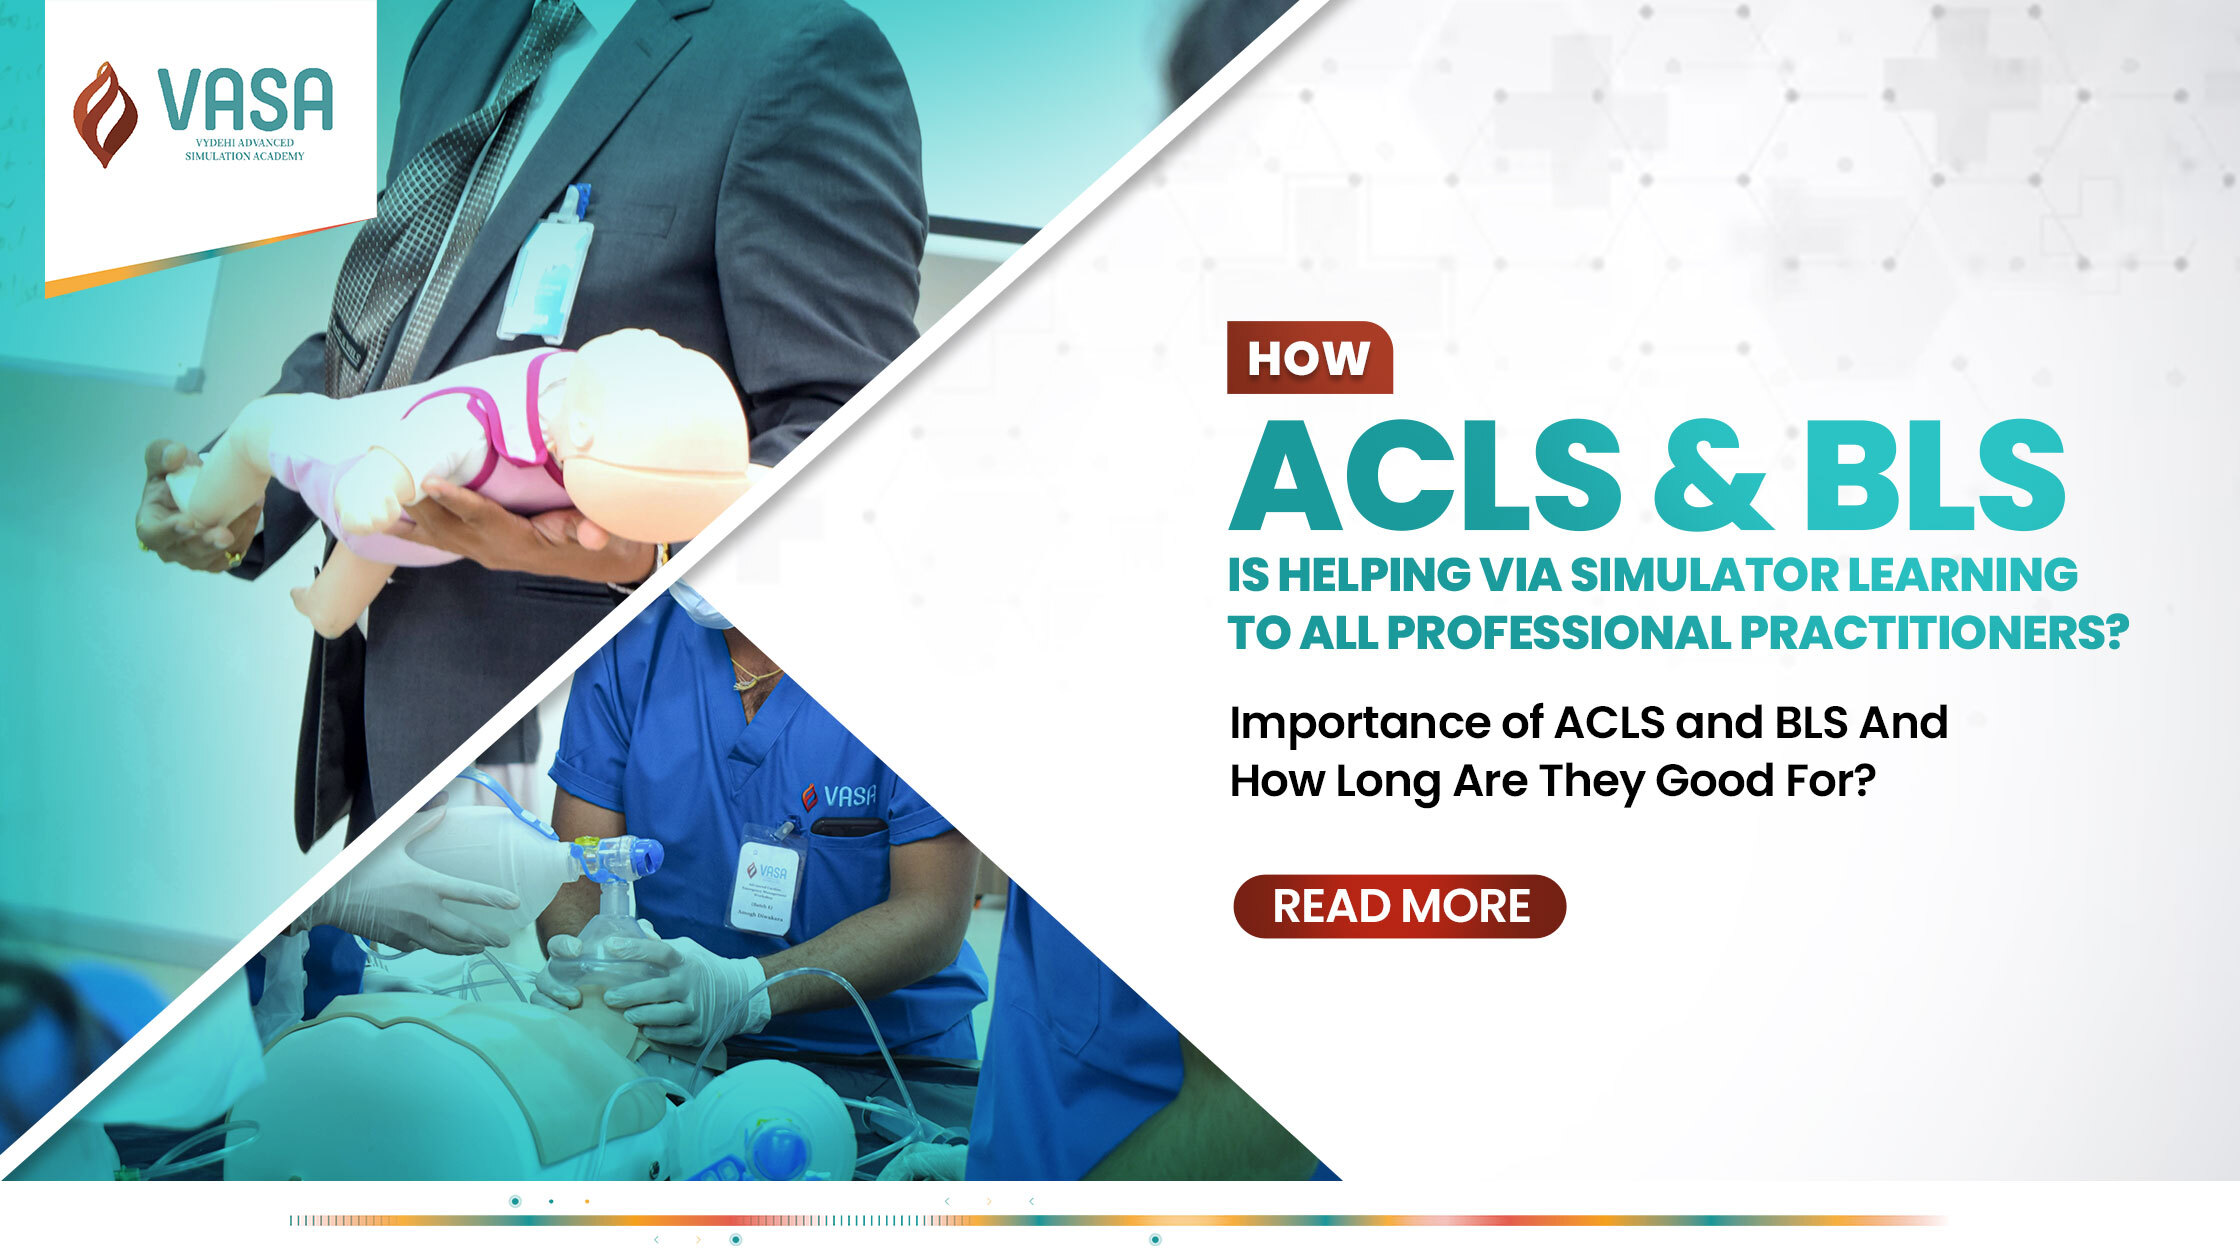 How ACLS & BLS Is Helping Via Simulator Learning To All Professional Practitioners?